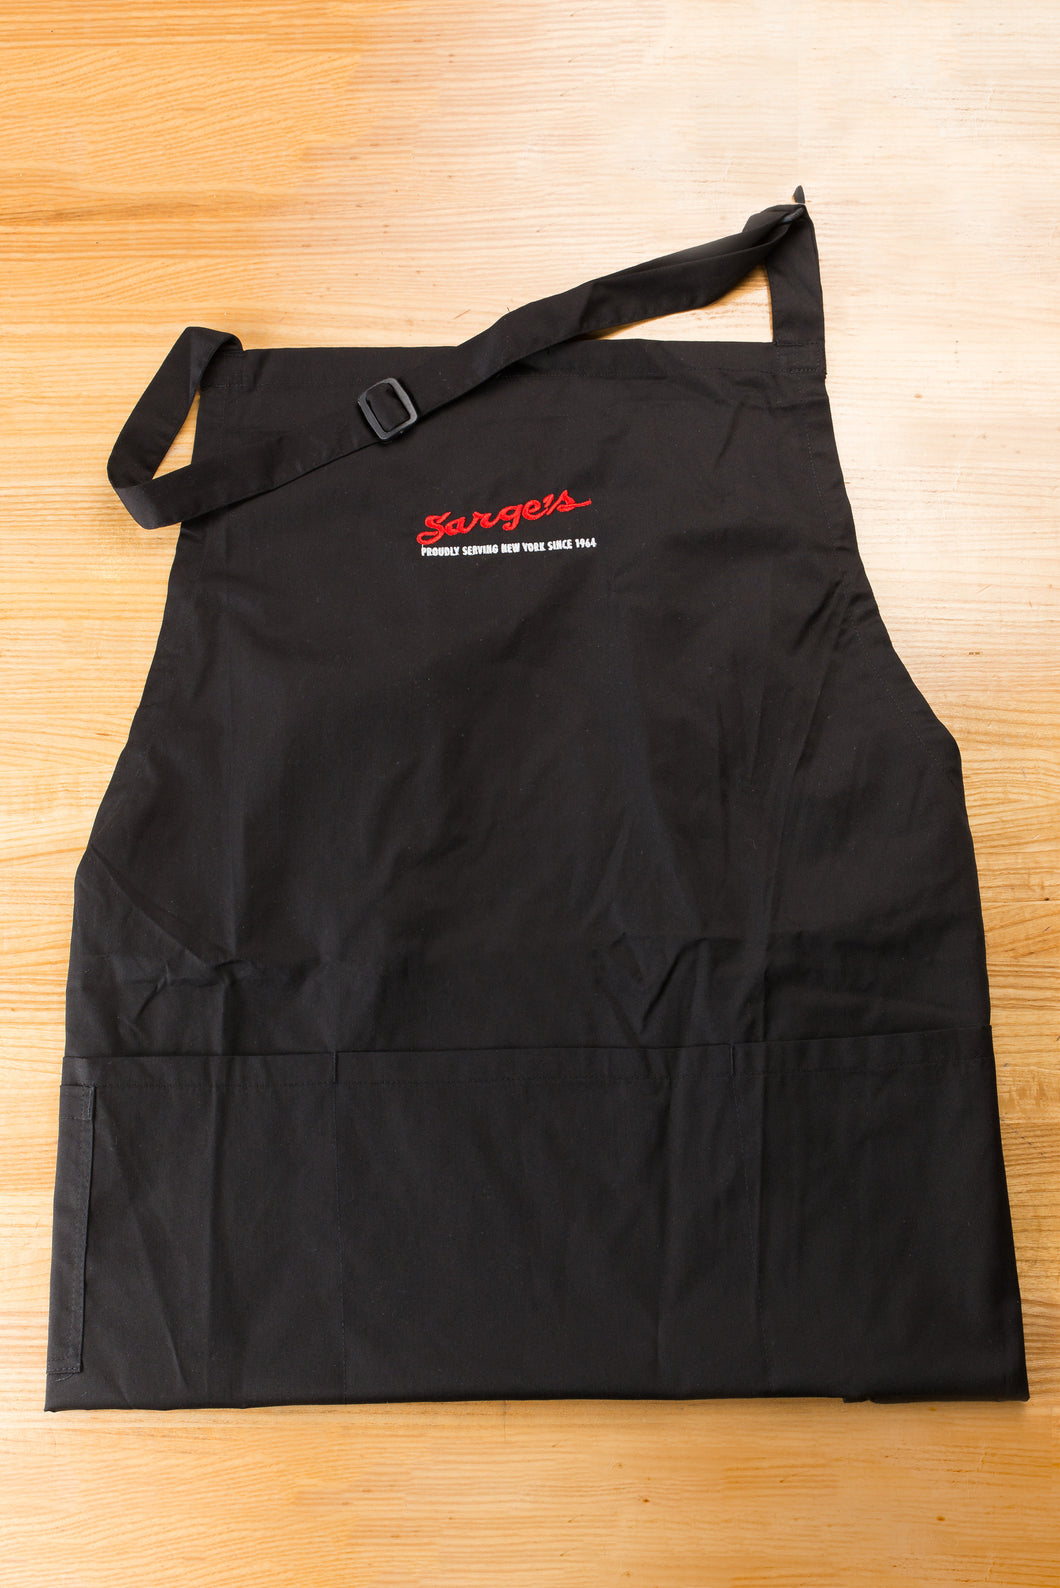 Sarge's Full Length Apron with Embroidered Sarge's LOGO